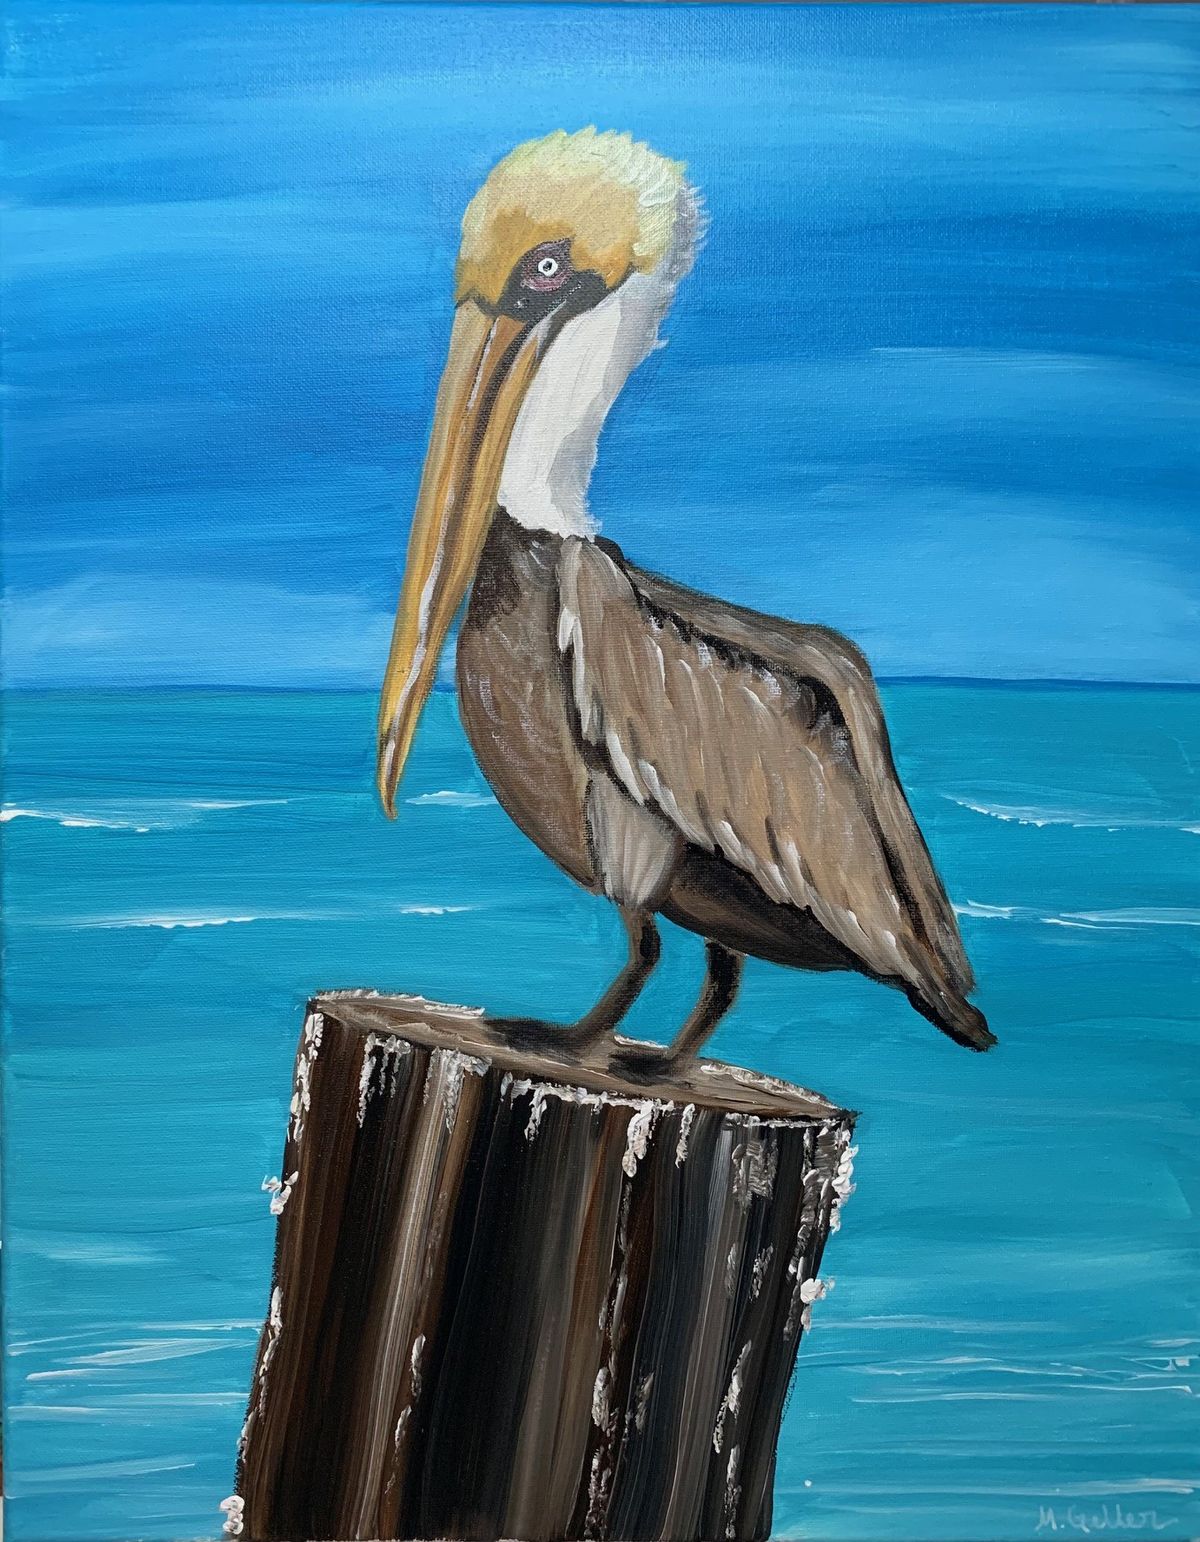 Class: Pelican Painting